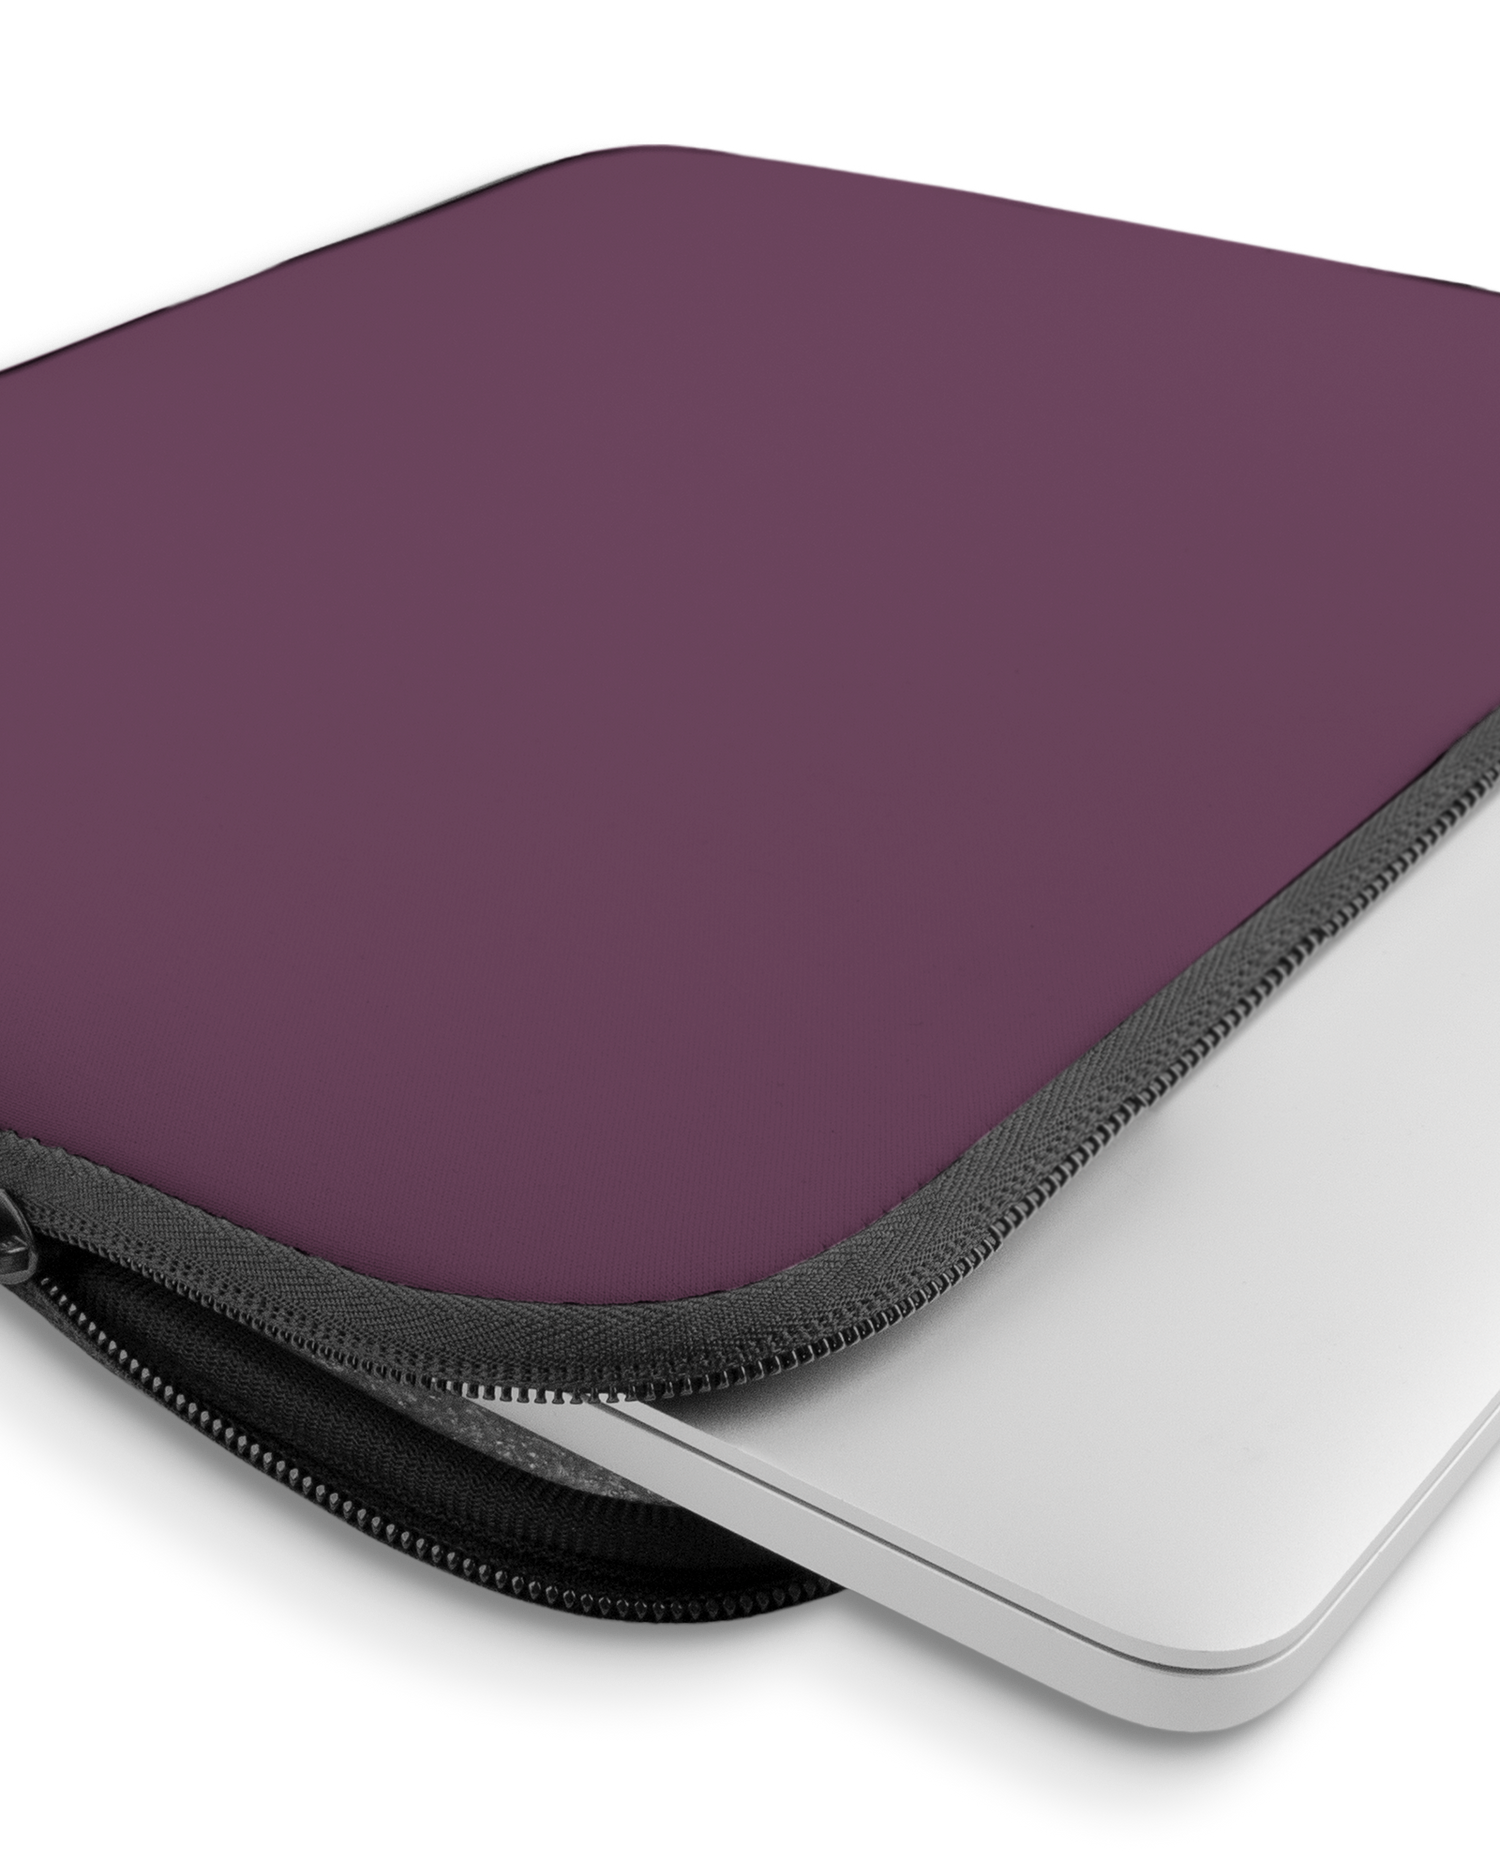 PLUM Laptop Case 15 inch with device inside